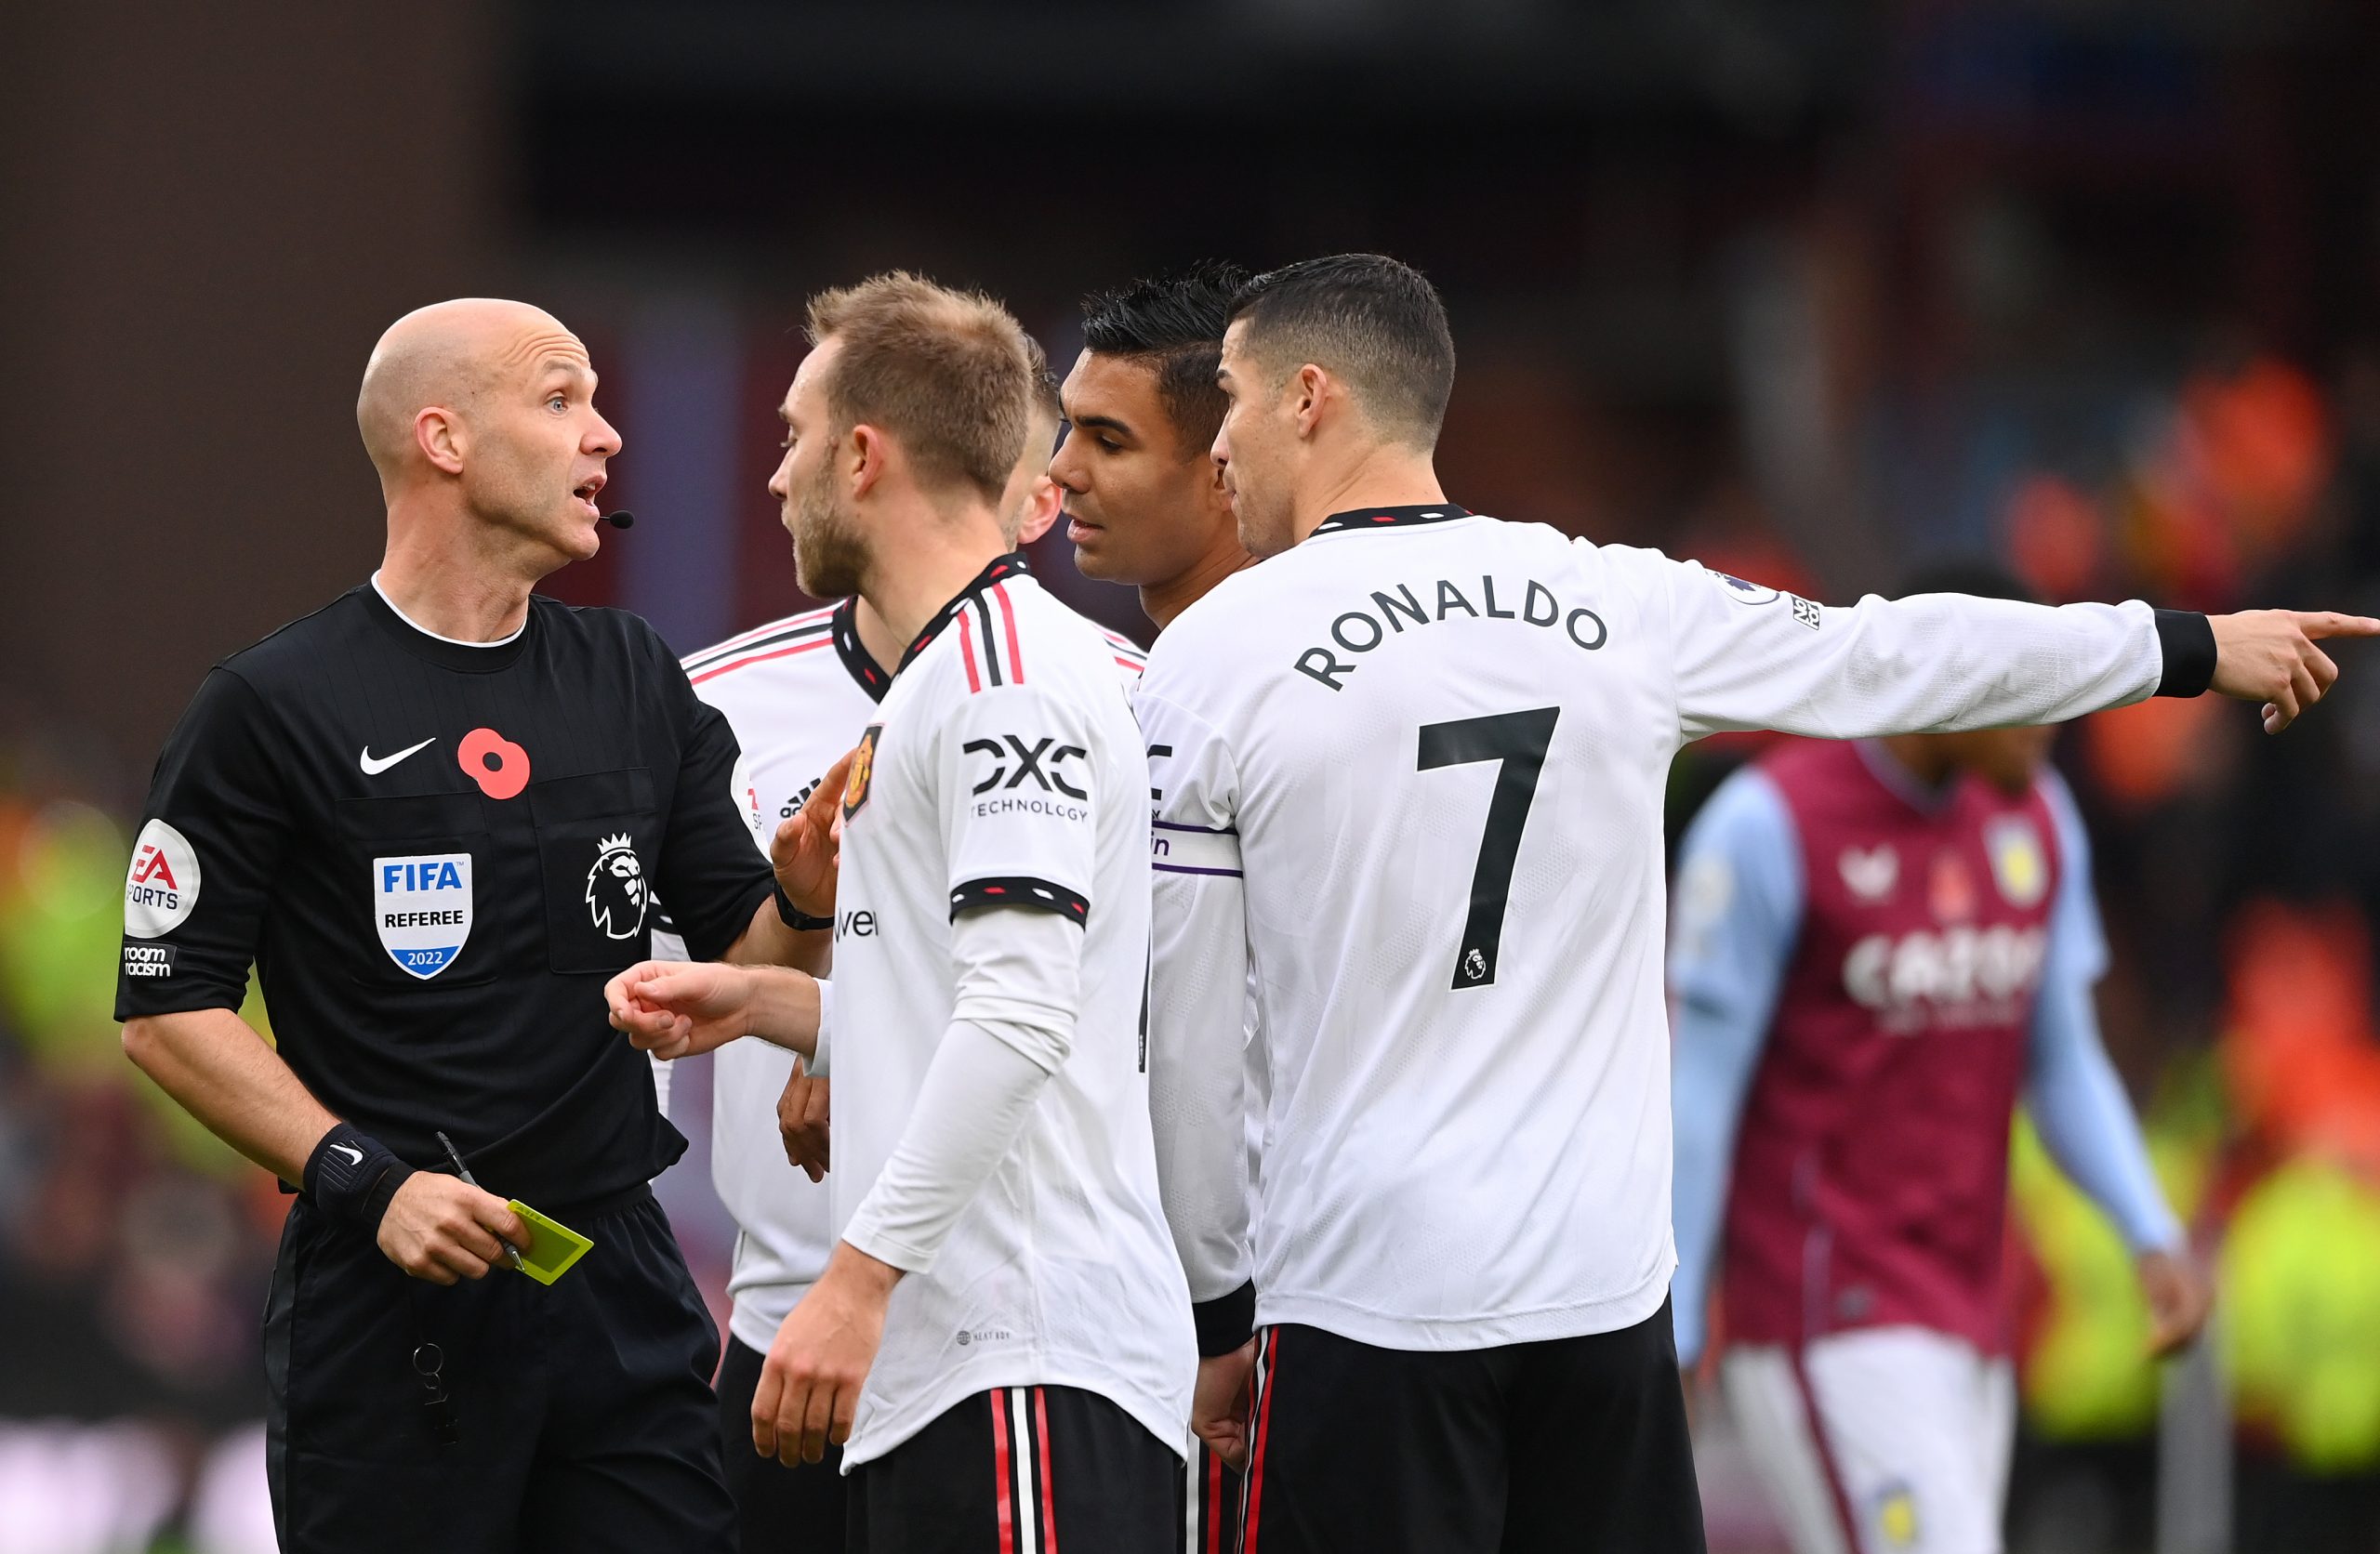 Referee Anthony Taylor is confronted by Christian Eriksen and Cristiano Ronaldo of Manchester United during the Premier League match between Aston Villa and Manchester United at Villa Park on November 06, 2022 in Birmingham, England